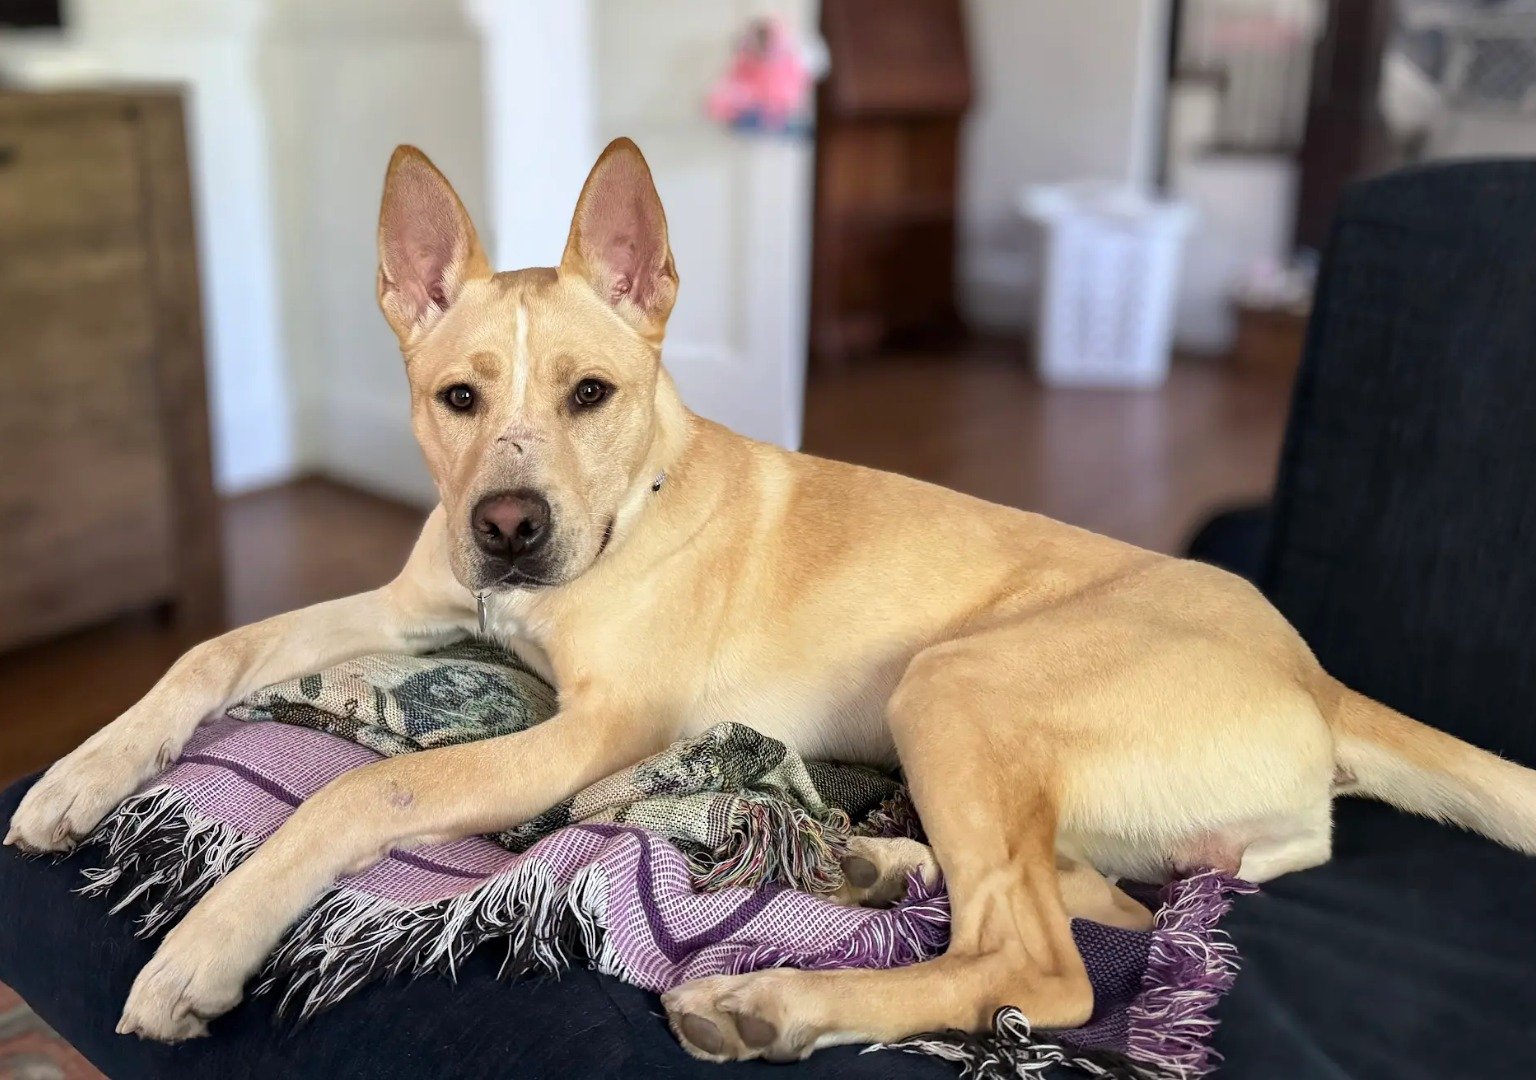 If you&rsquo;re looking for a playful, affectionate, and well-mannered pup, take a peek at our boy Bentley! 💛

Bentley is an 11-month-old lab/shepherd mix with a friendly and laid-back demeanor. This smart cookie knows basic commands and listens wel